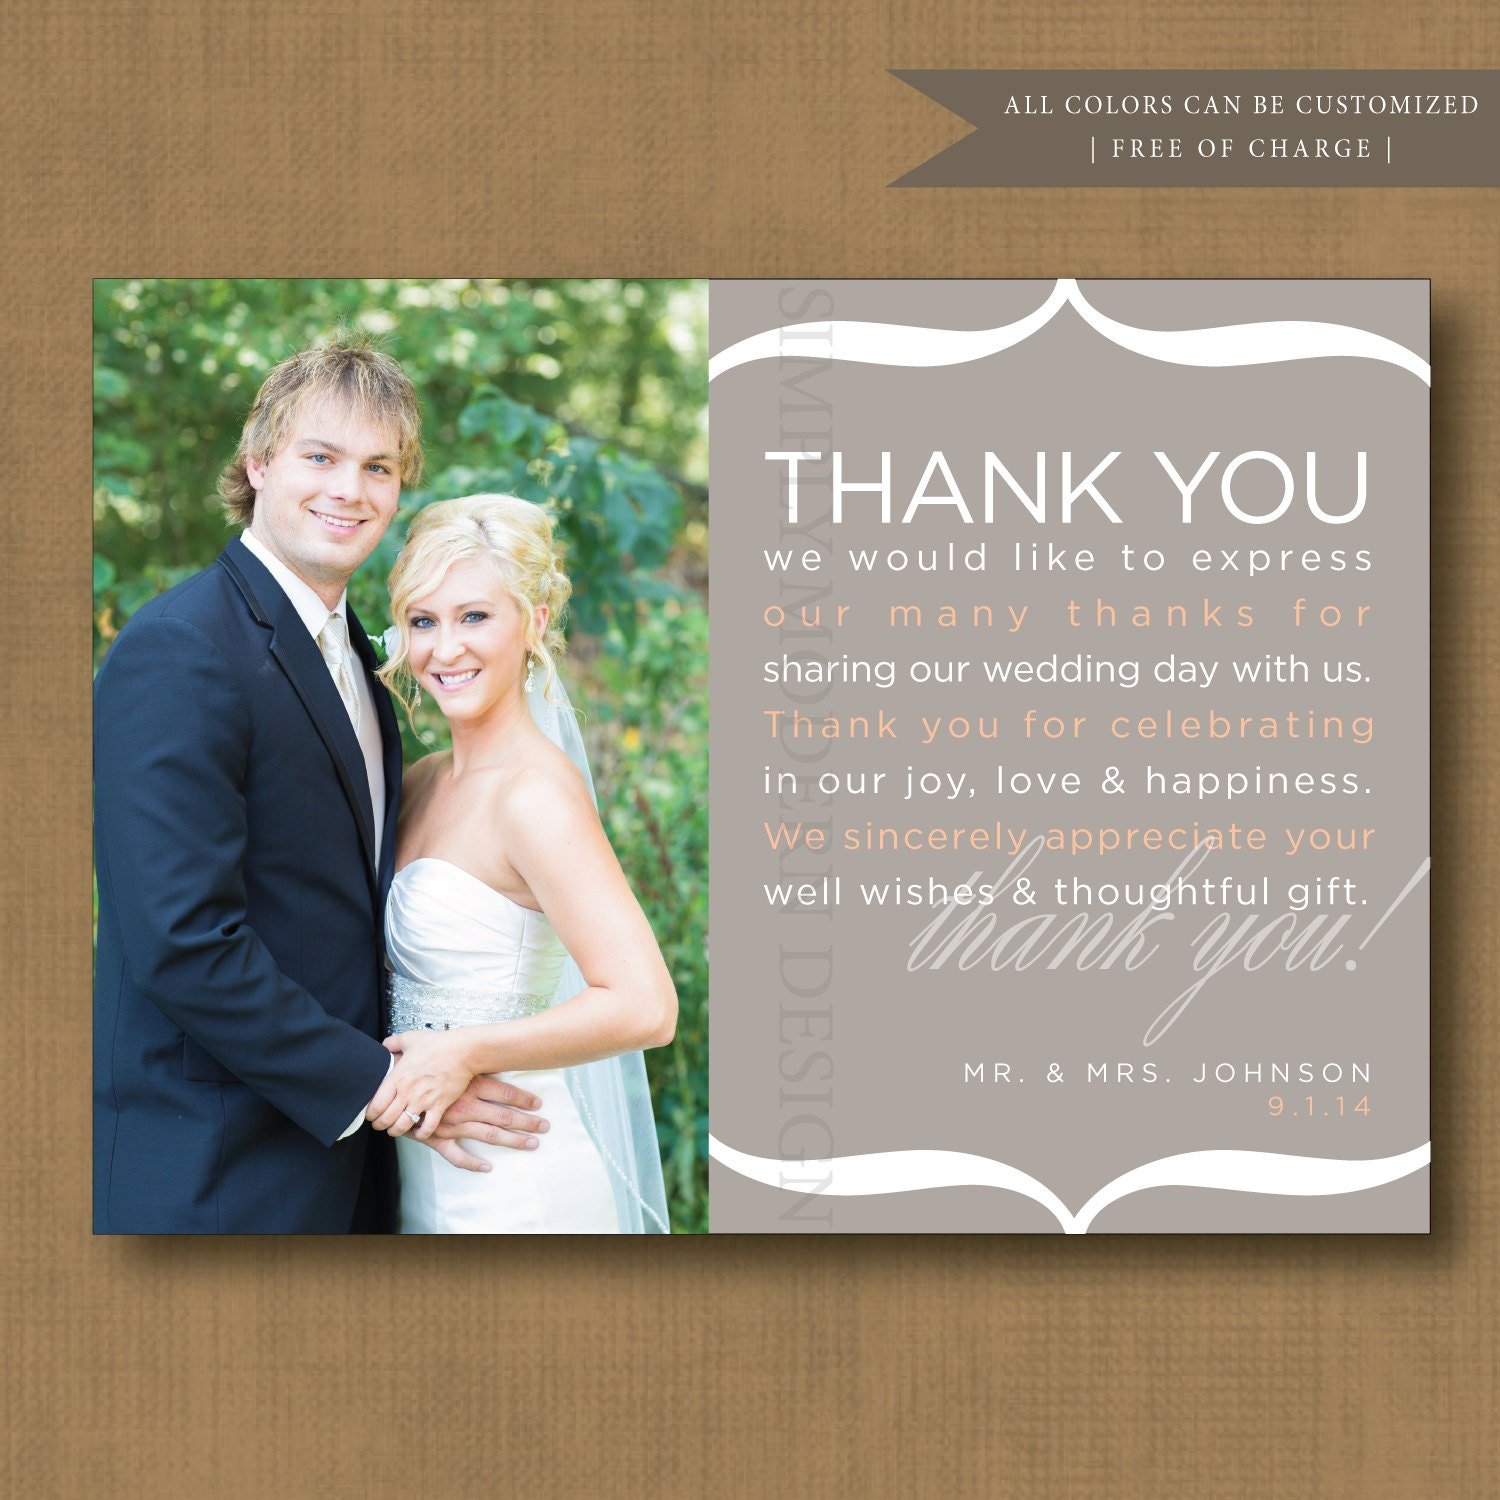 thank you note wedding thank you card by SimplyModernDesignx